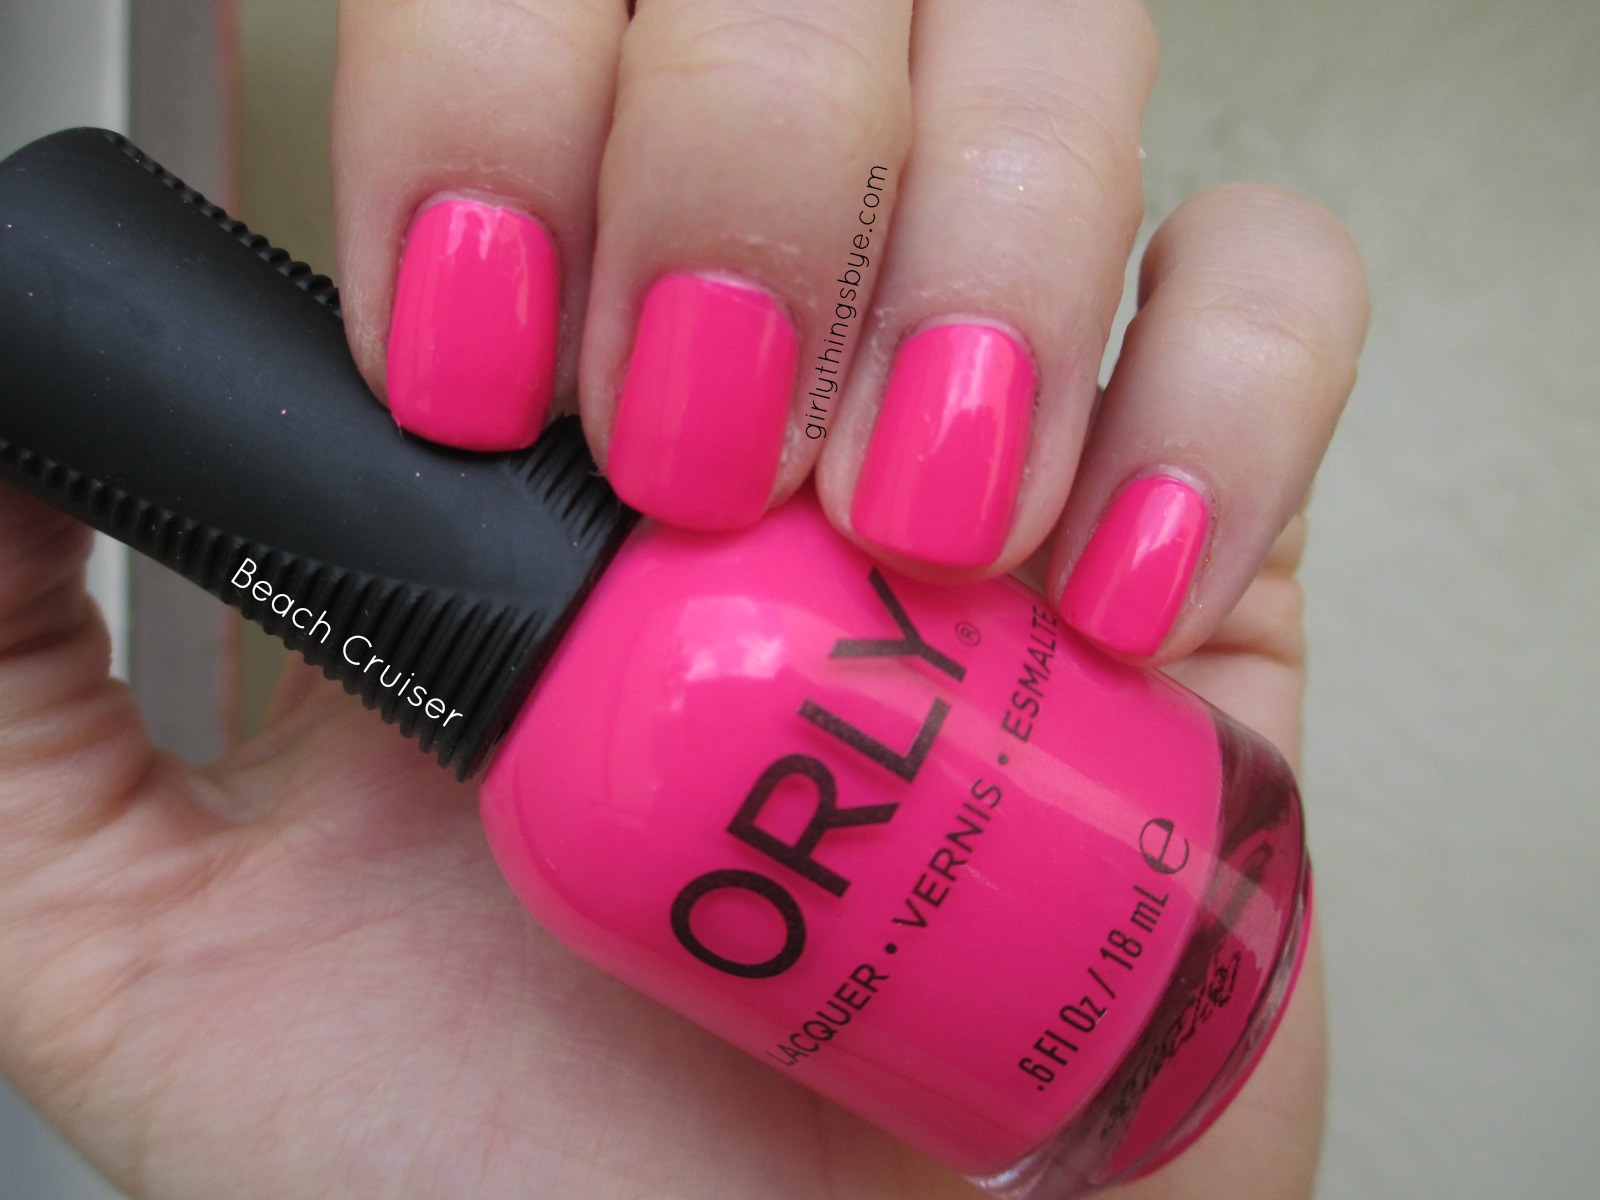 5. Orly Nail Lacquer, Beach Cruiser - wide 2